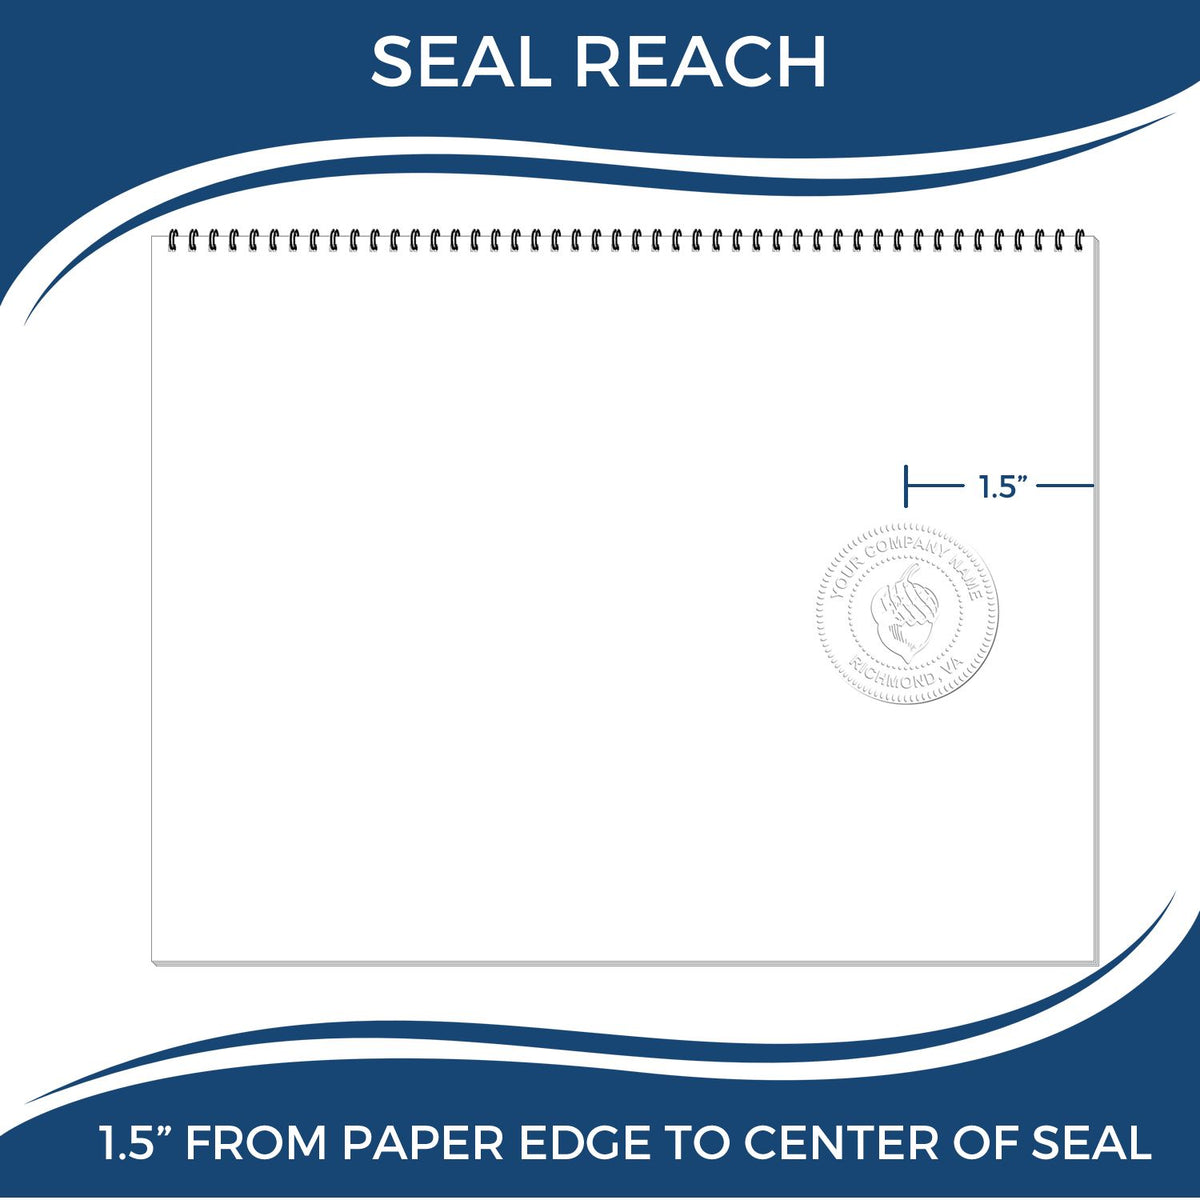 An infographic showing the seal reach which is represented by a ruler and a miniature seal image of the Hybrid Nebraska Architect Seal